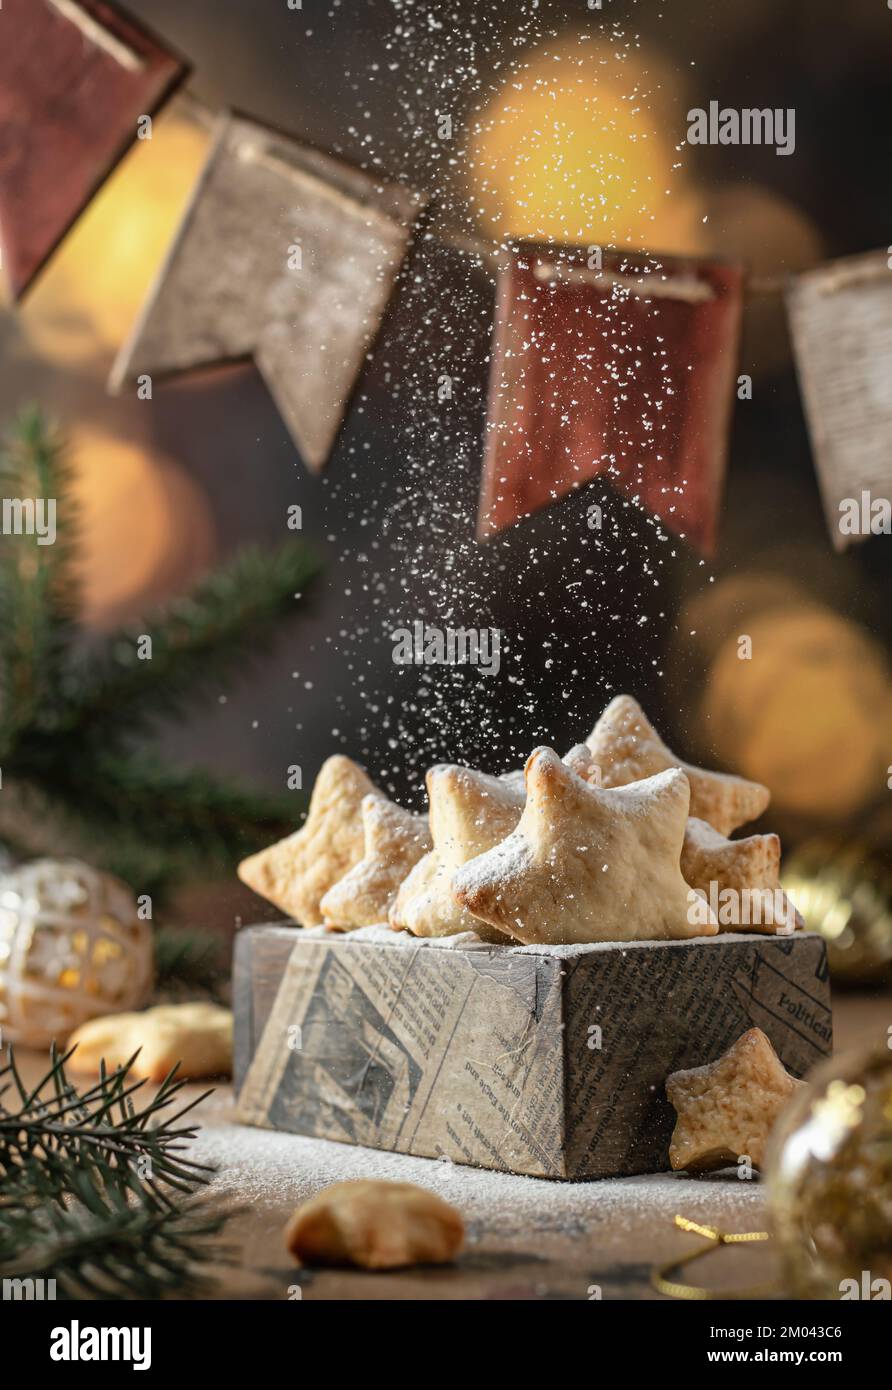 Homemade Christmas shortbread star shape cookies with powdered sugar in wooden box, with green fir tree, garland of wooden flags and golden bokeh Stock Photo